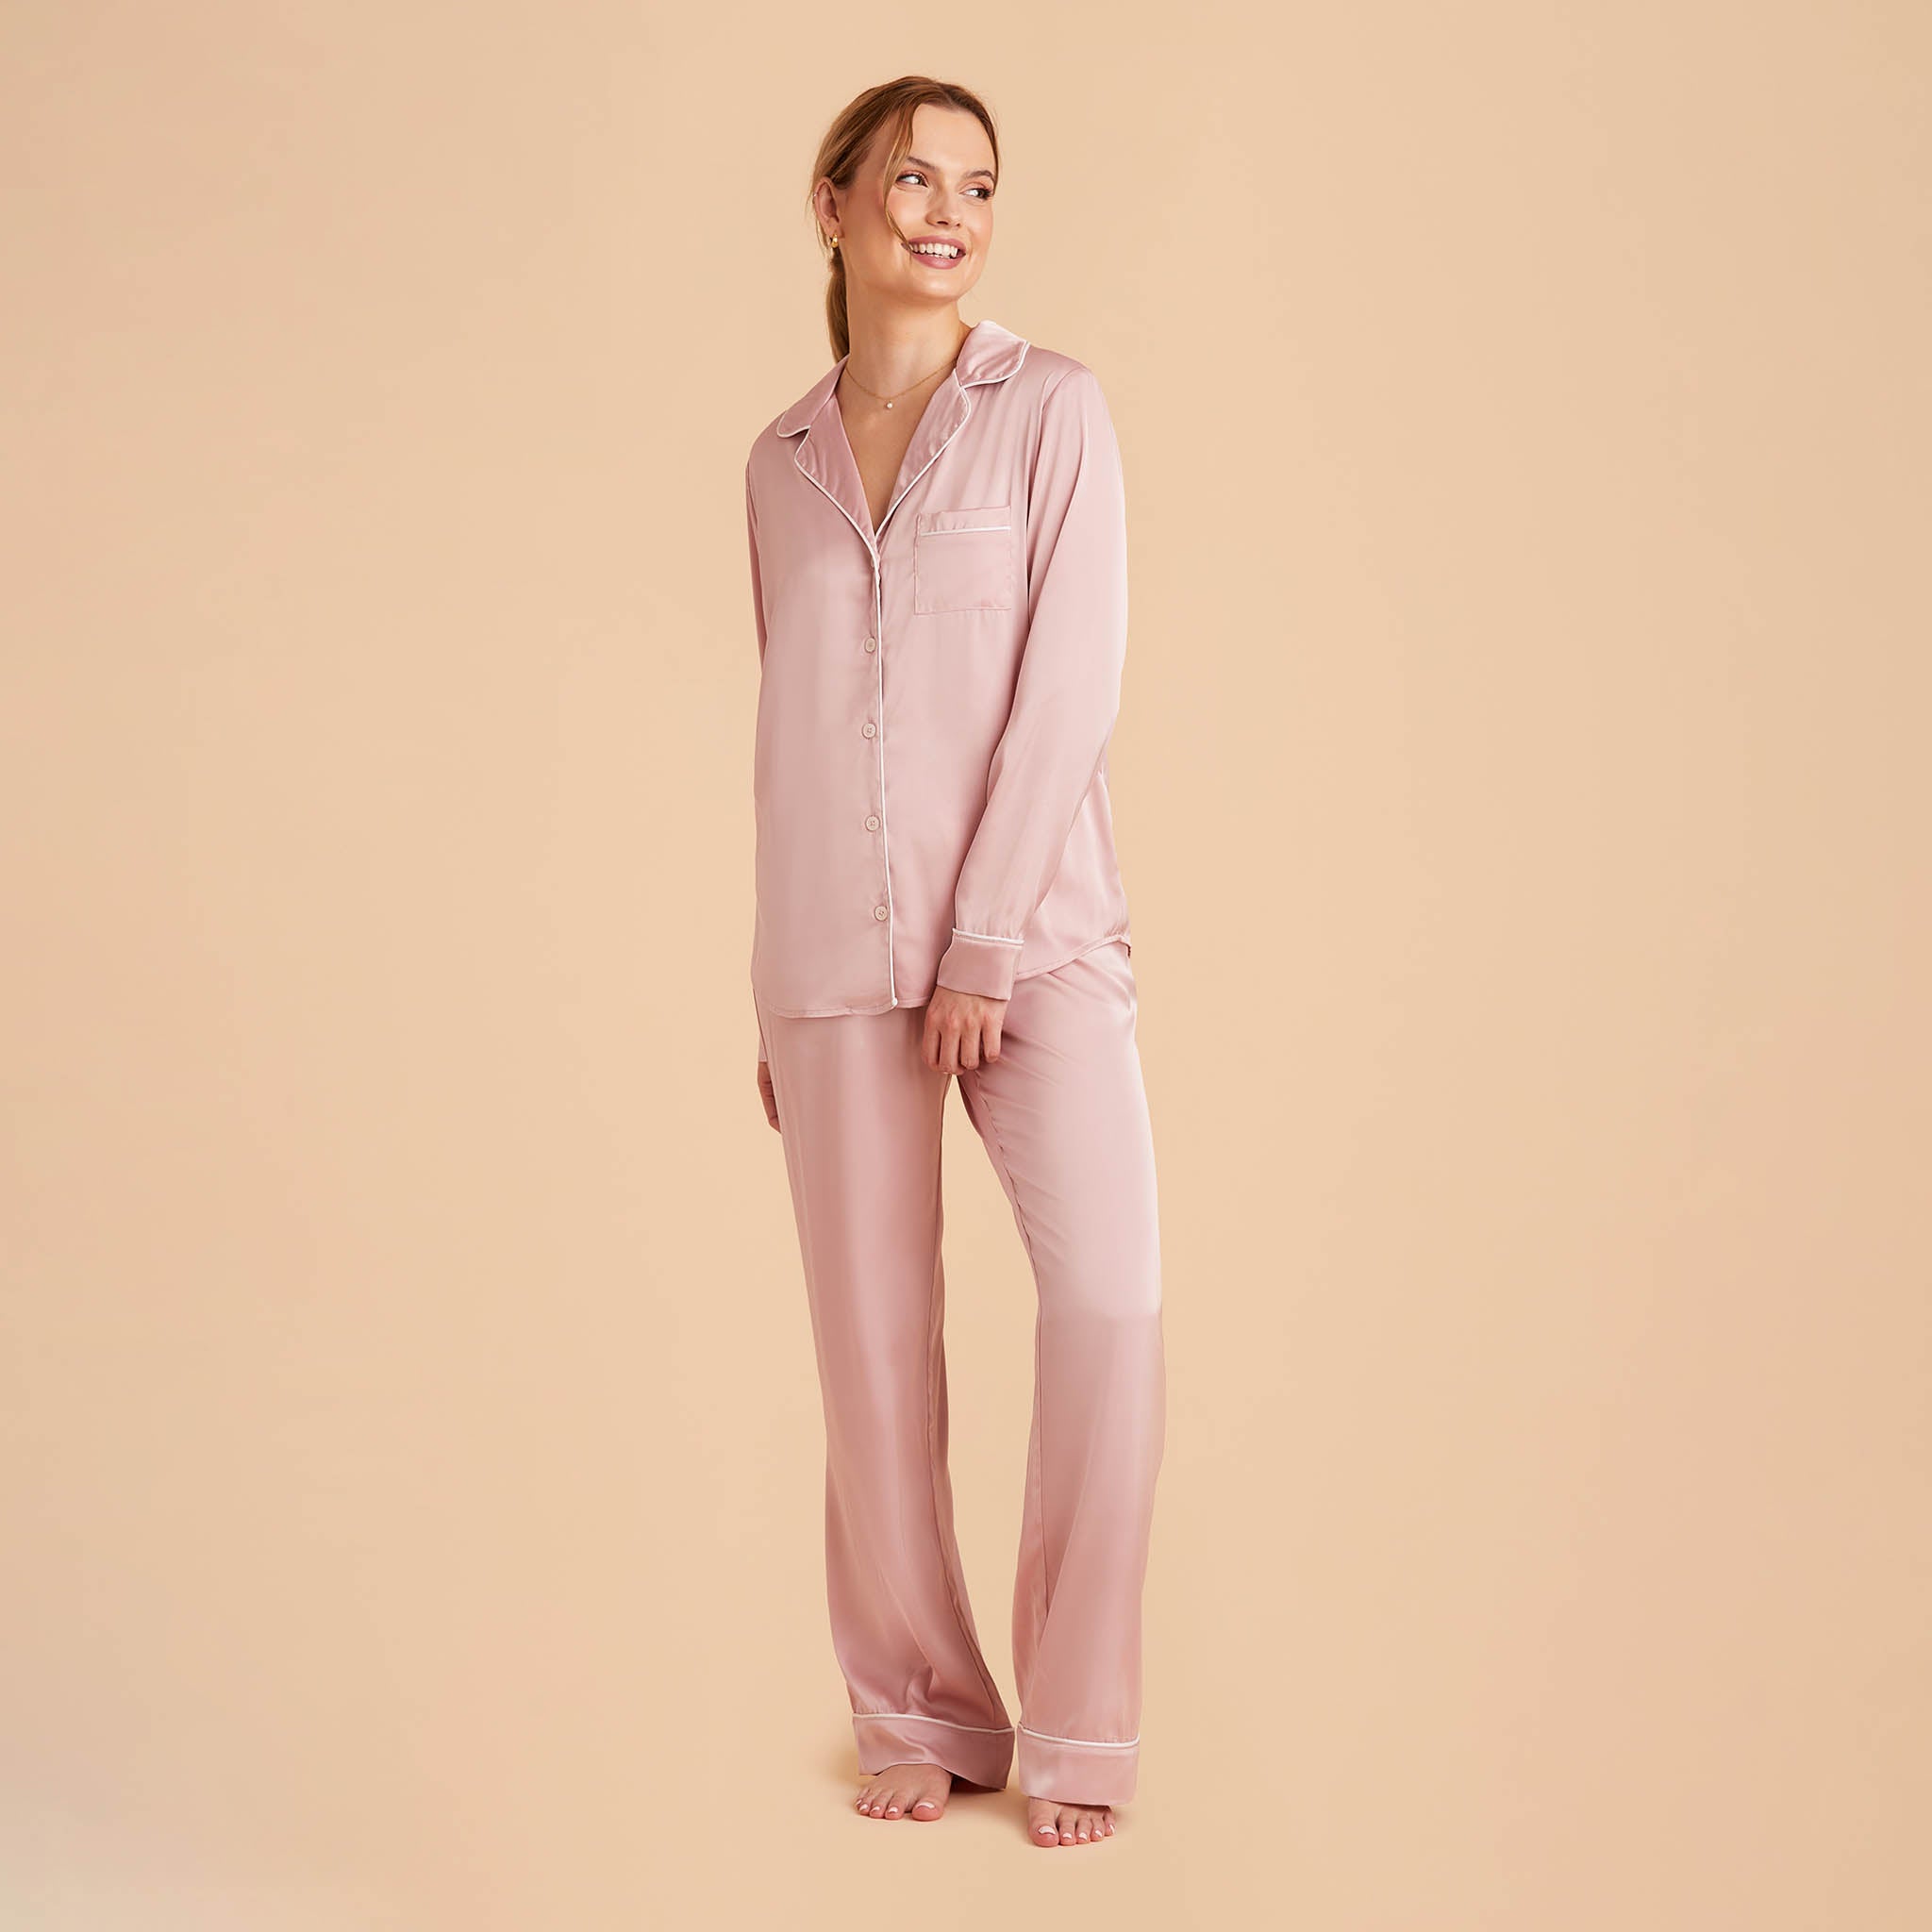 Jonny Satin Long Sleeve Pajama Top With White Piping in dusty pink, front view